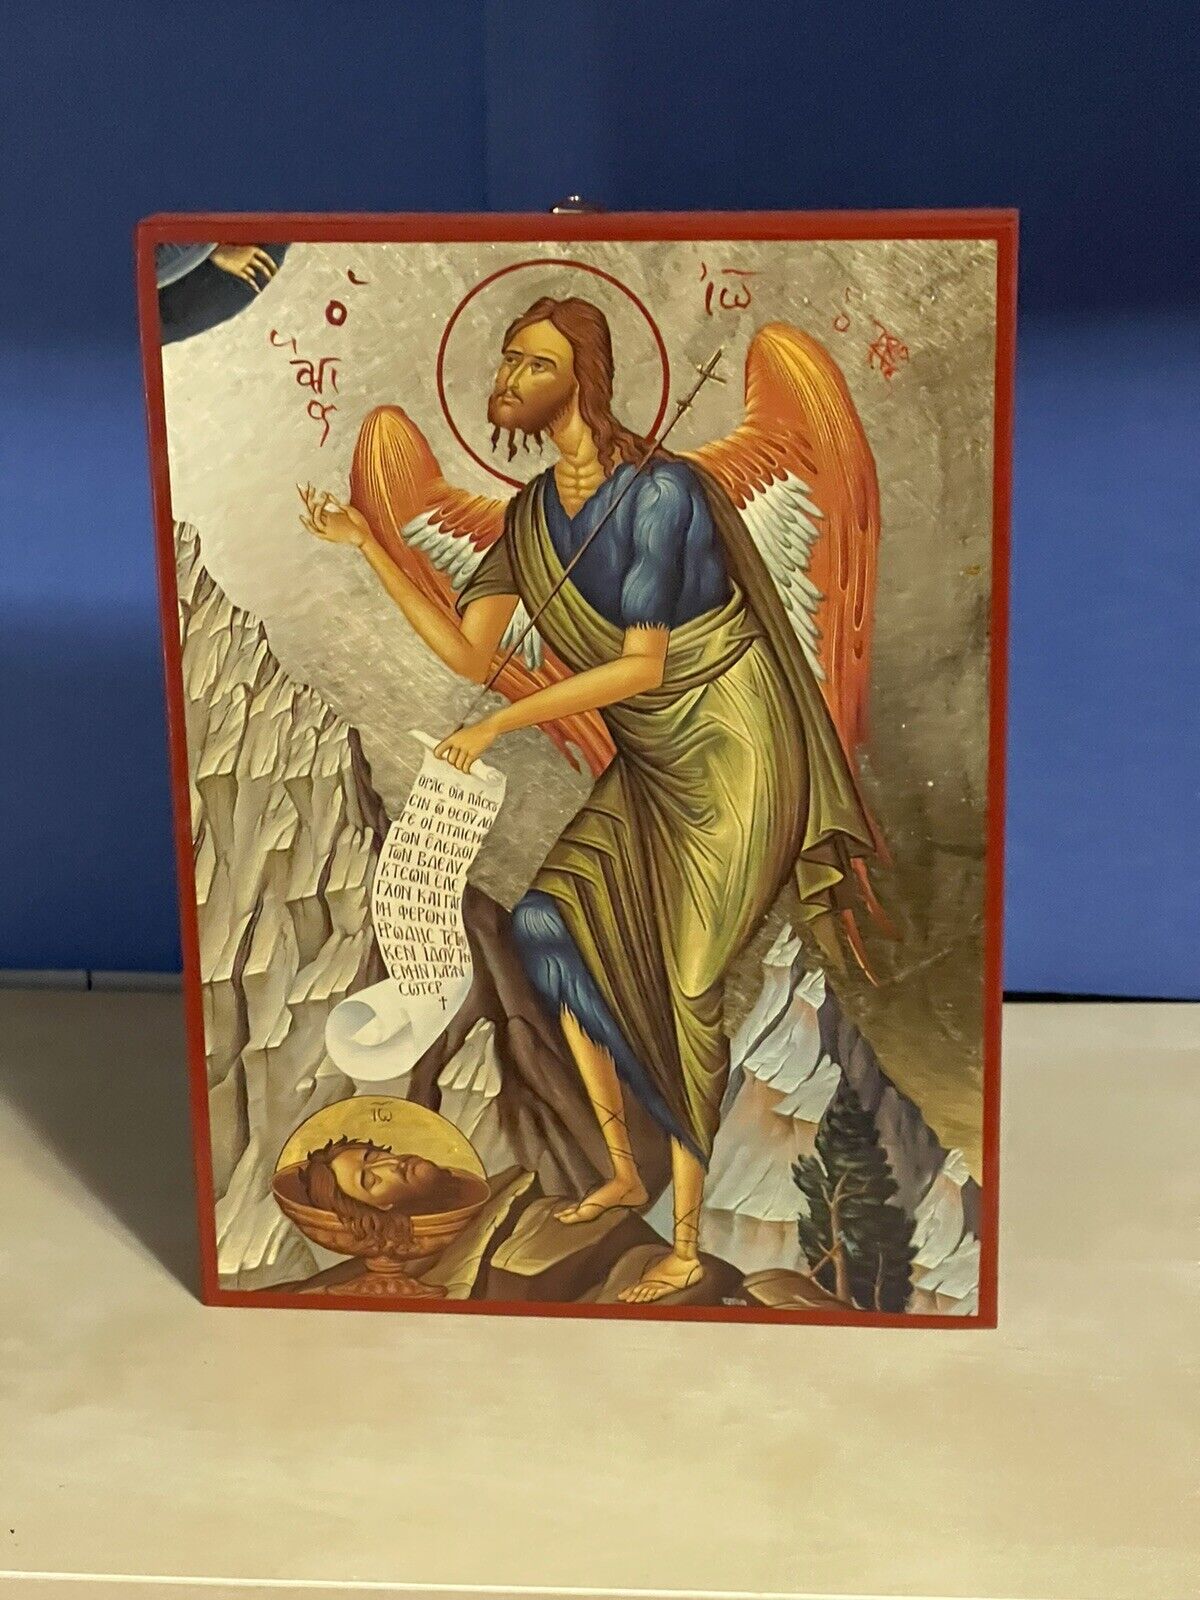 SAINT JOHN THE FORERUNNER, BIRD OF DESERT WOODEN ICON FLAT, WITH GOLD LEAF 5x7in